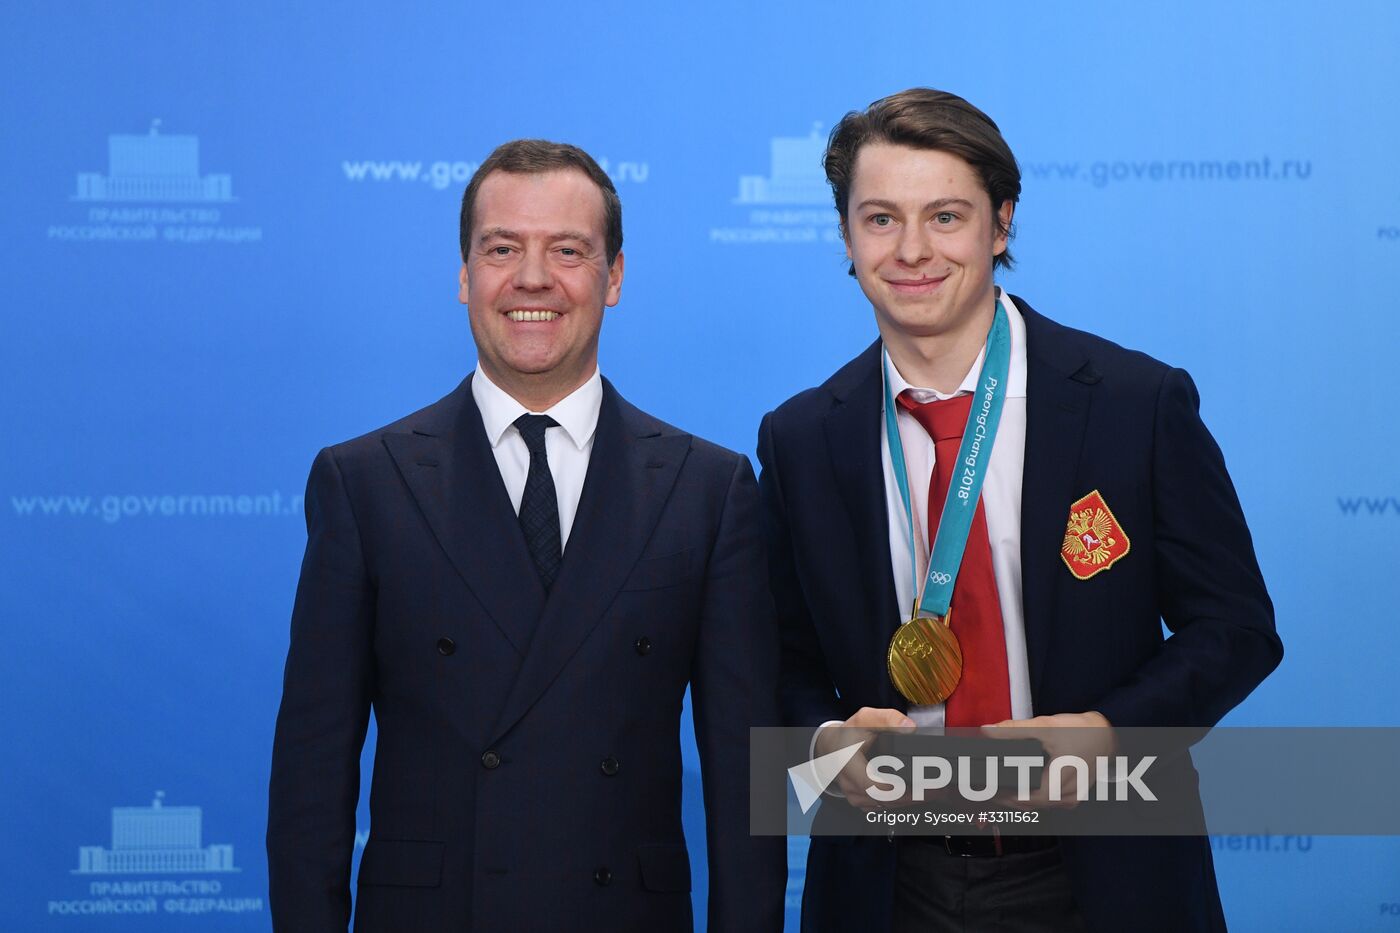 Prime Minister Dmitry Medvedev presents cars to 2018 Winter Olympics medalists at ceremony